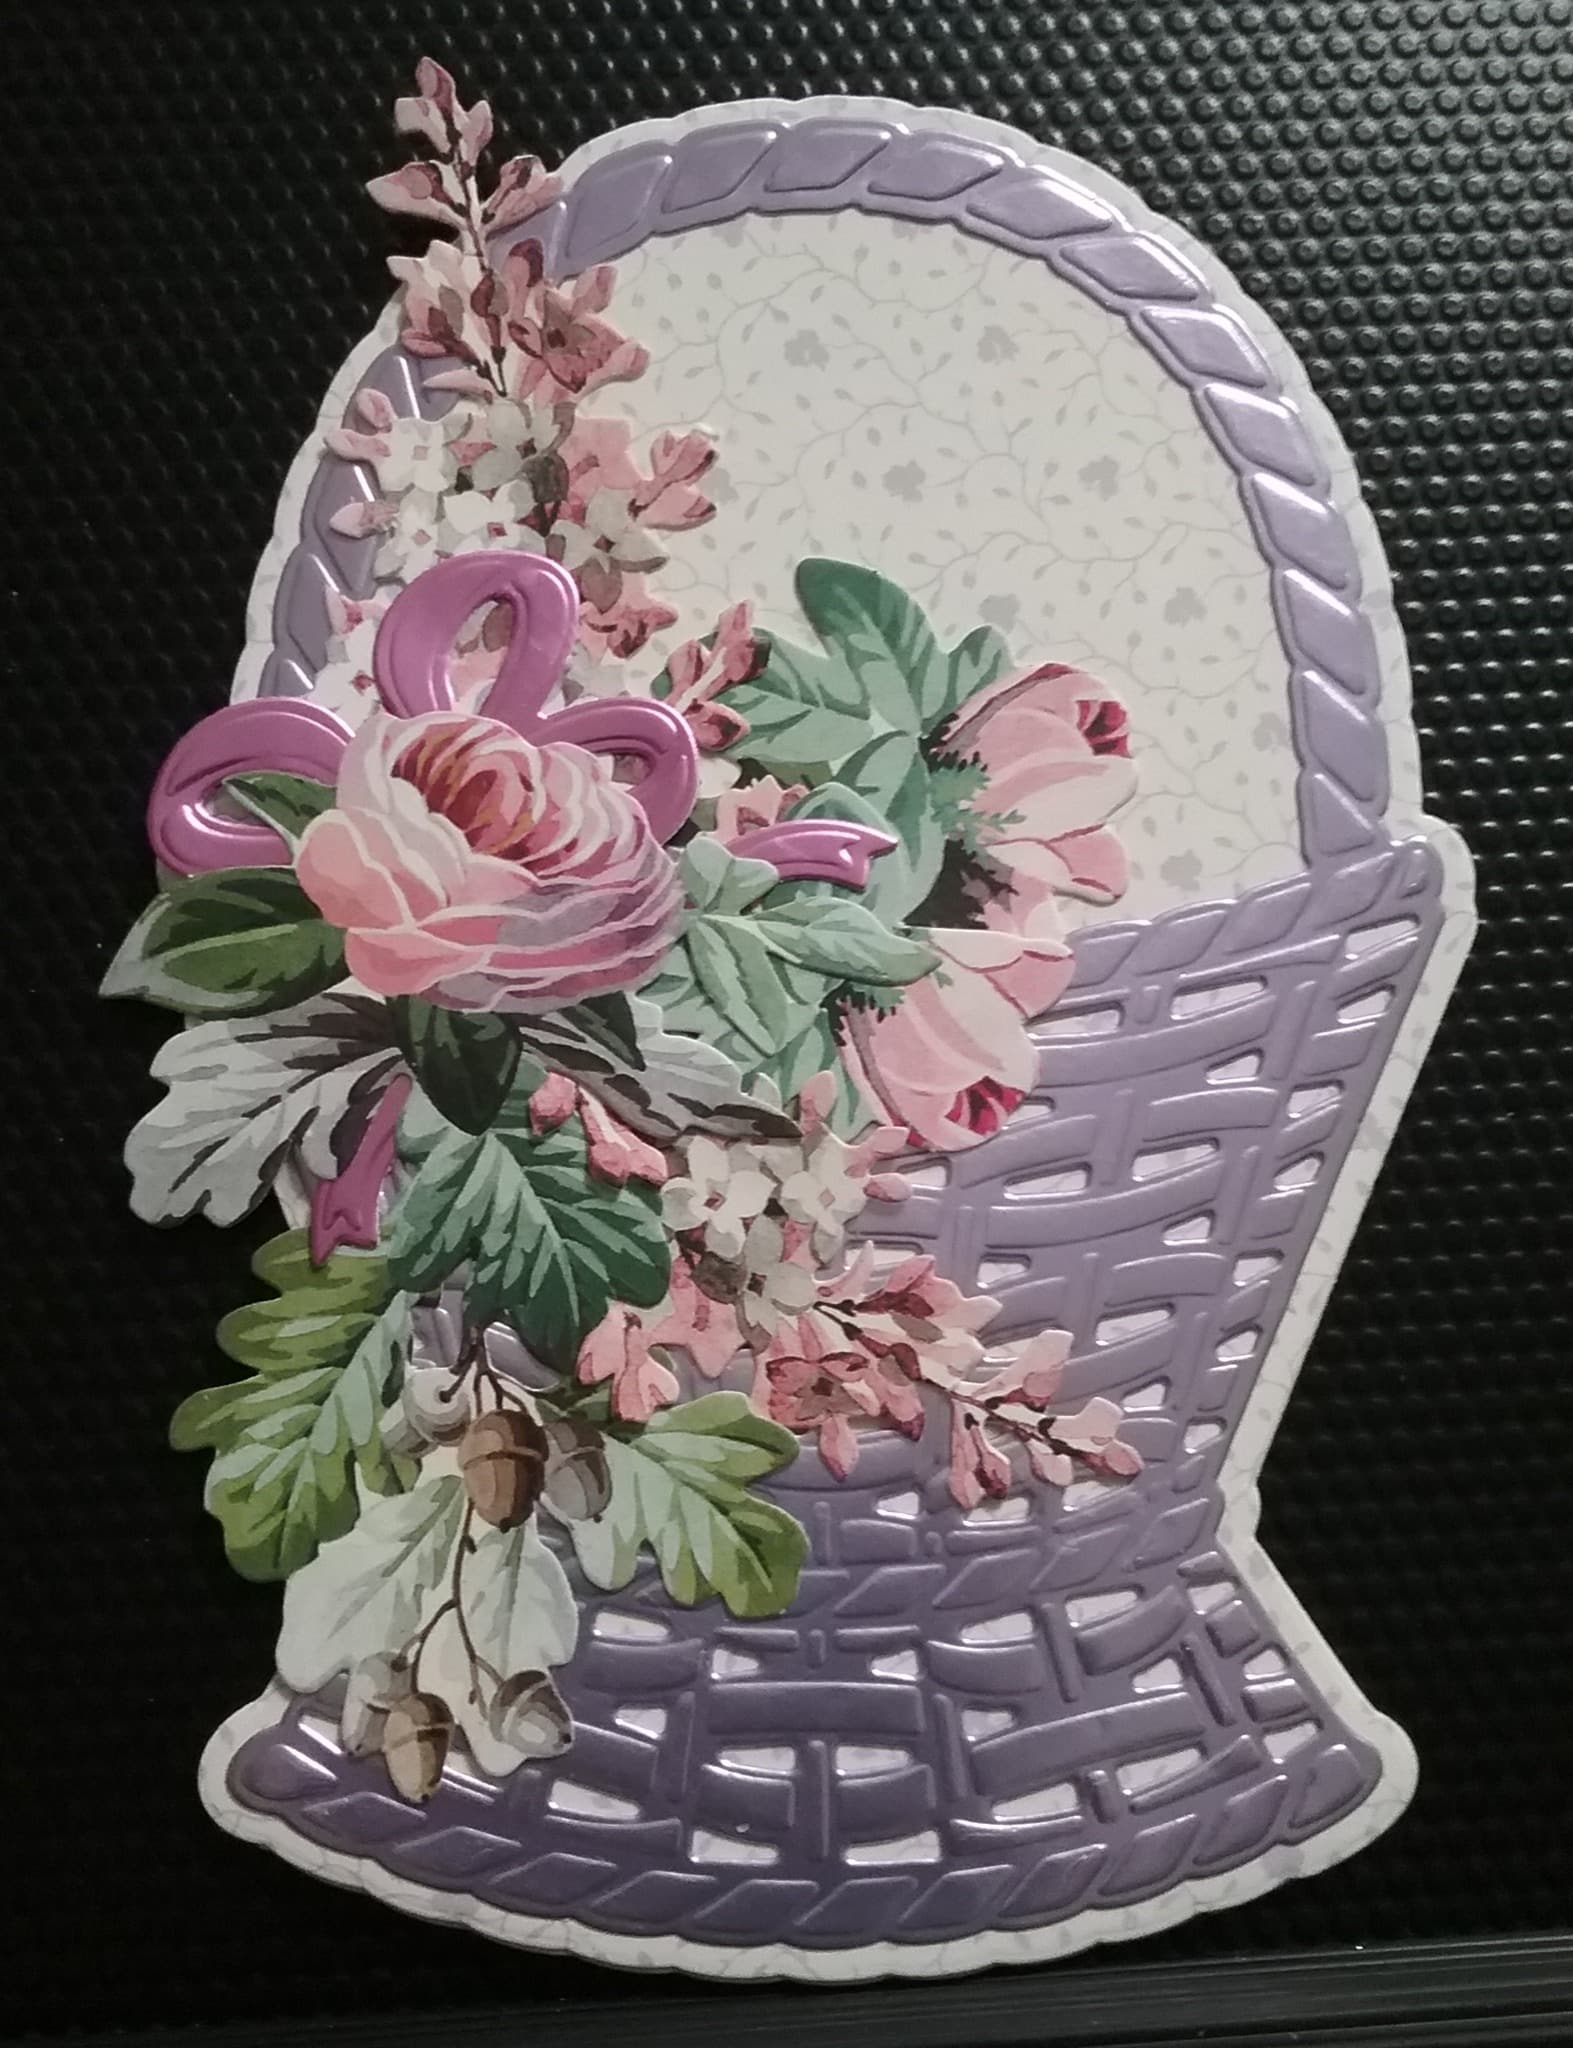 a picture of a basket with flowers on it.